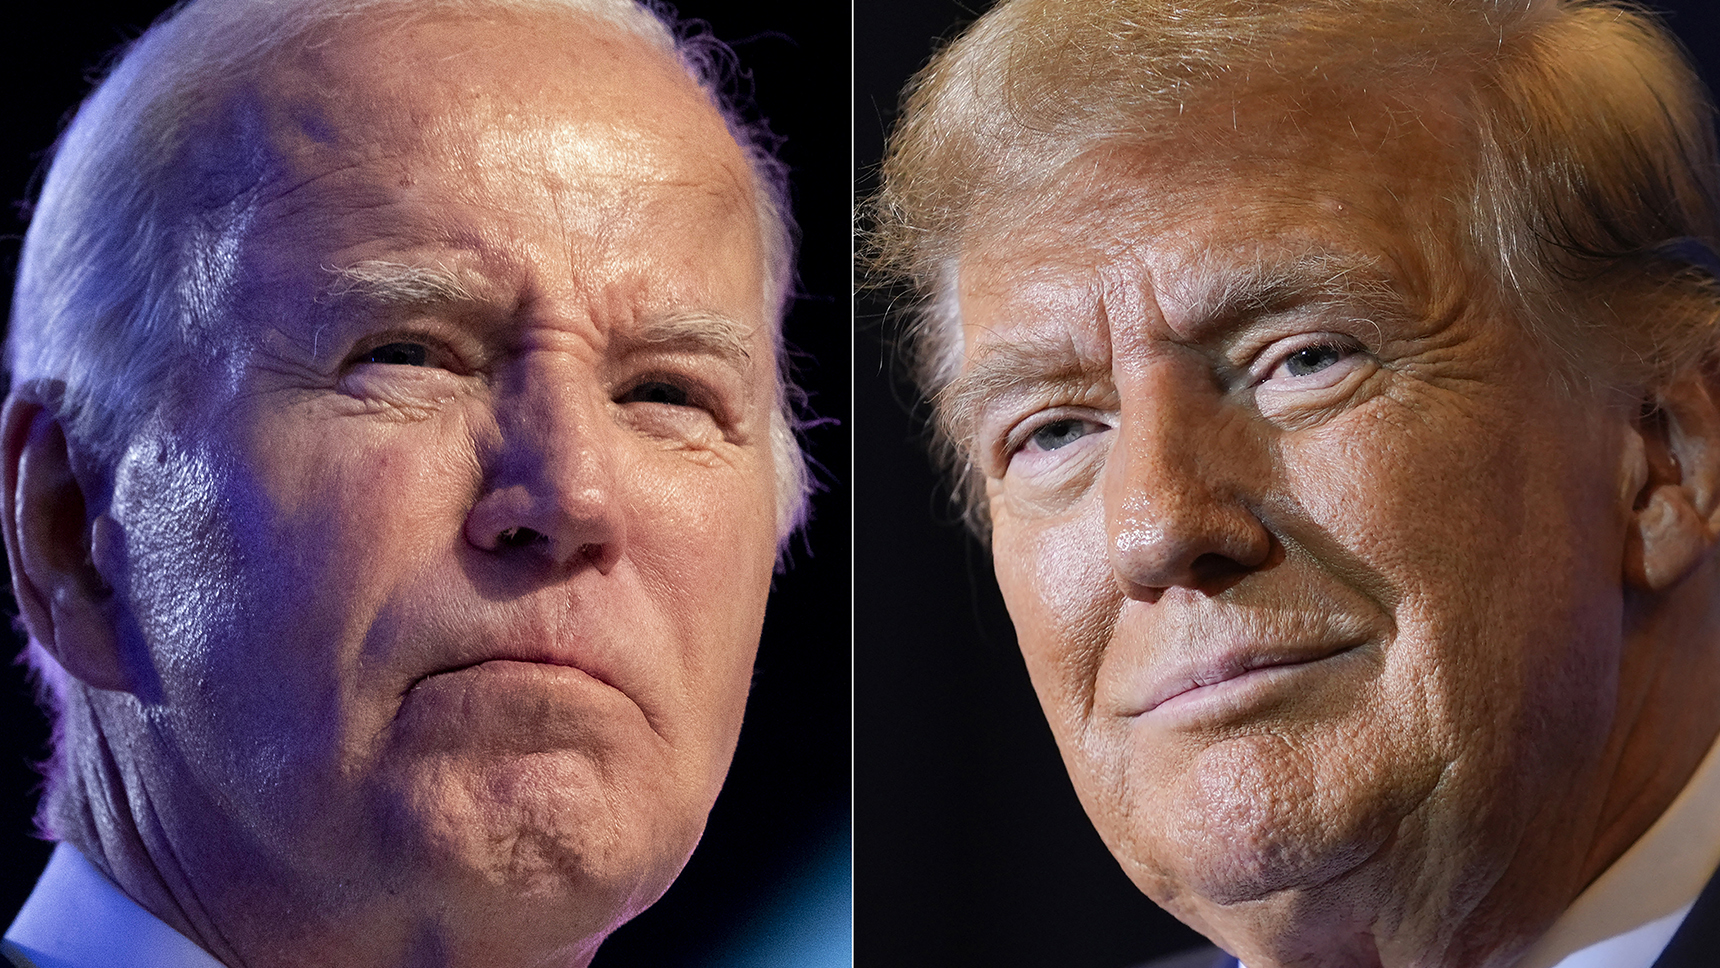 Michigan voters share thoughts on Biden, Trump ahead of 2024 presidential election